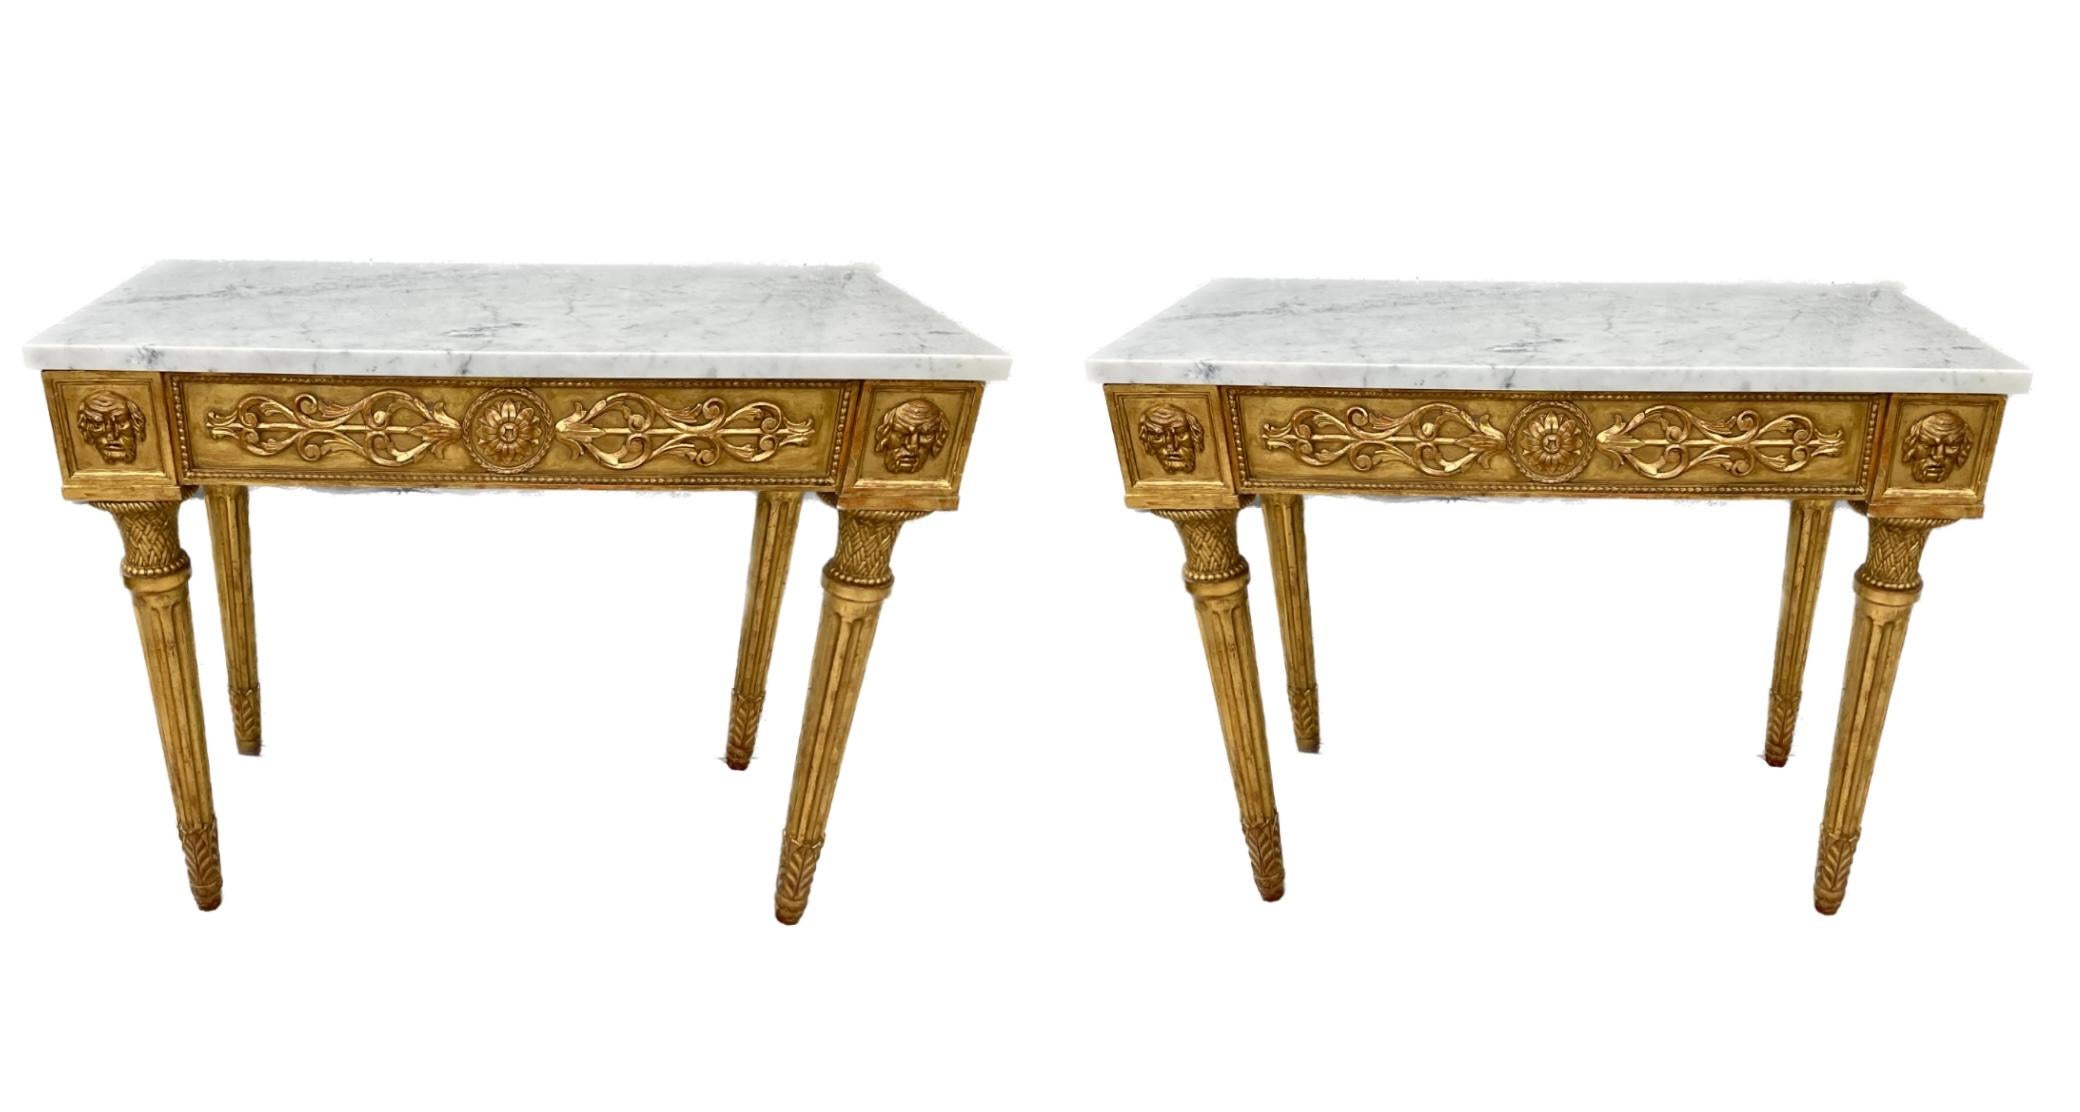 Pair Of 19th Century Italian Neoclassical Giltwood Console table With Marble Top For Sale 3